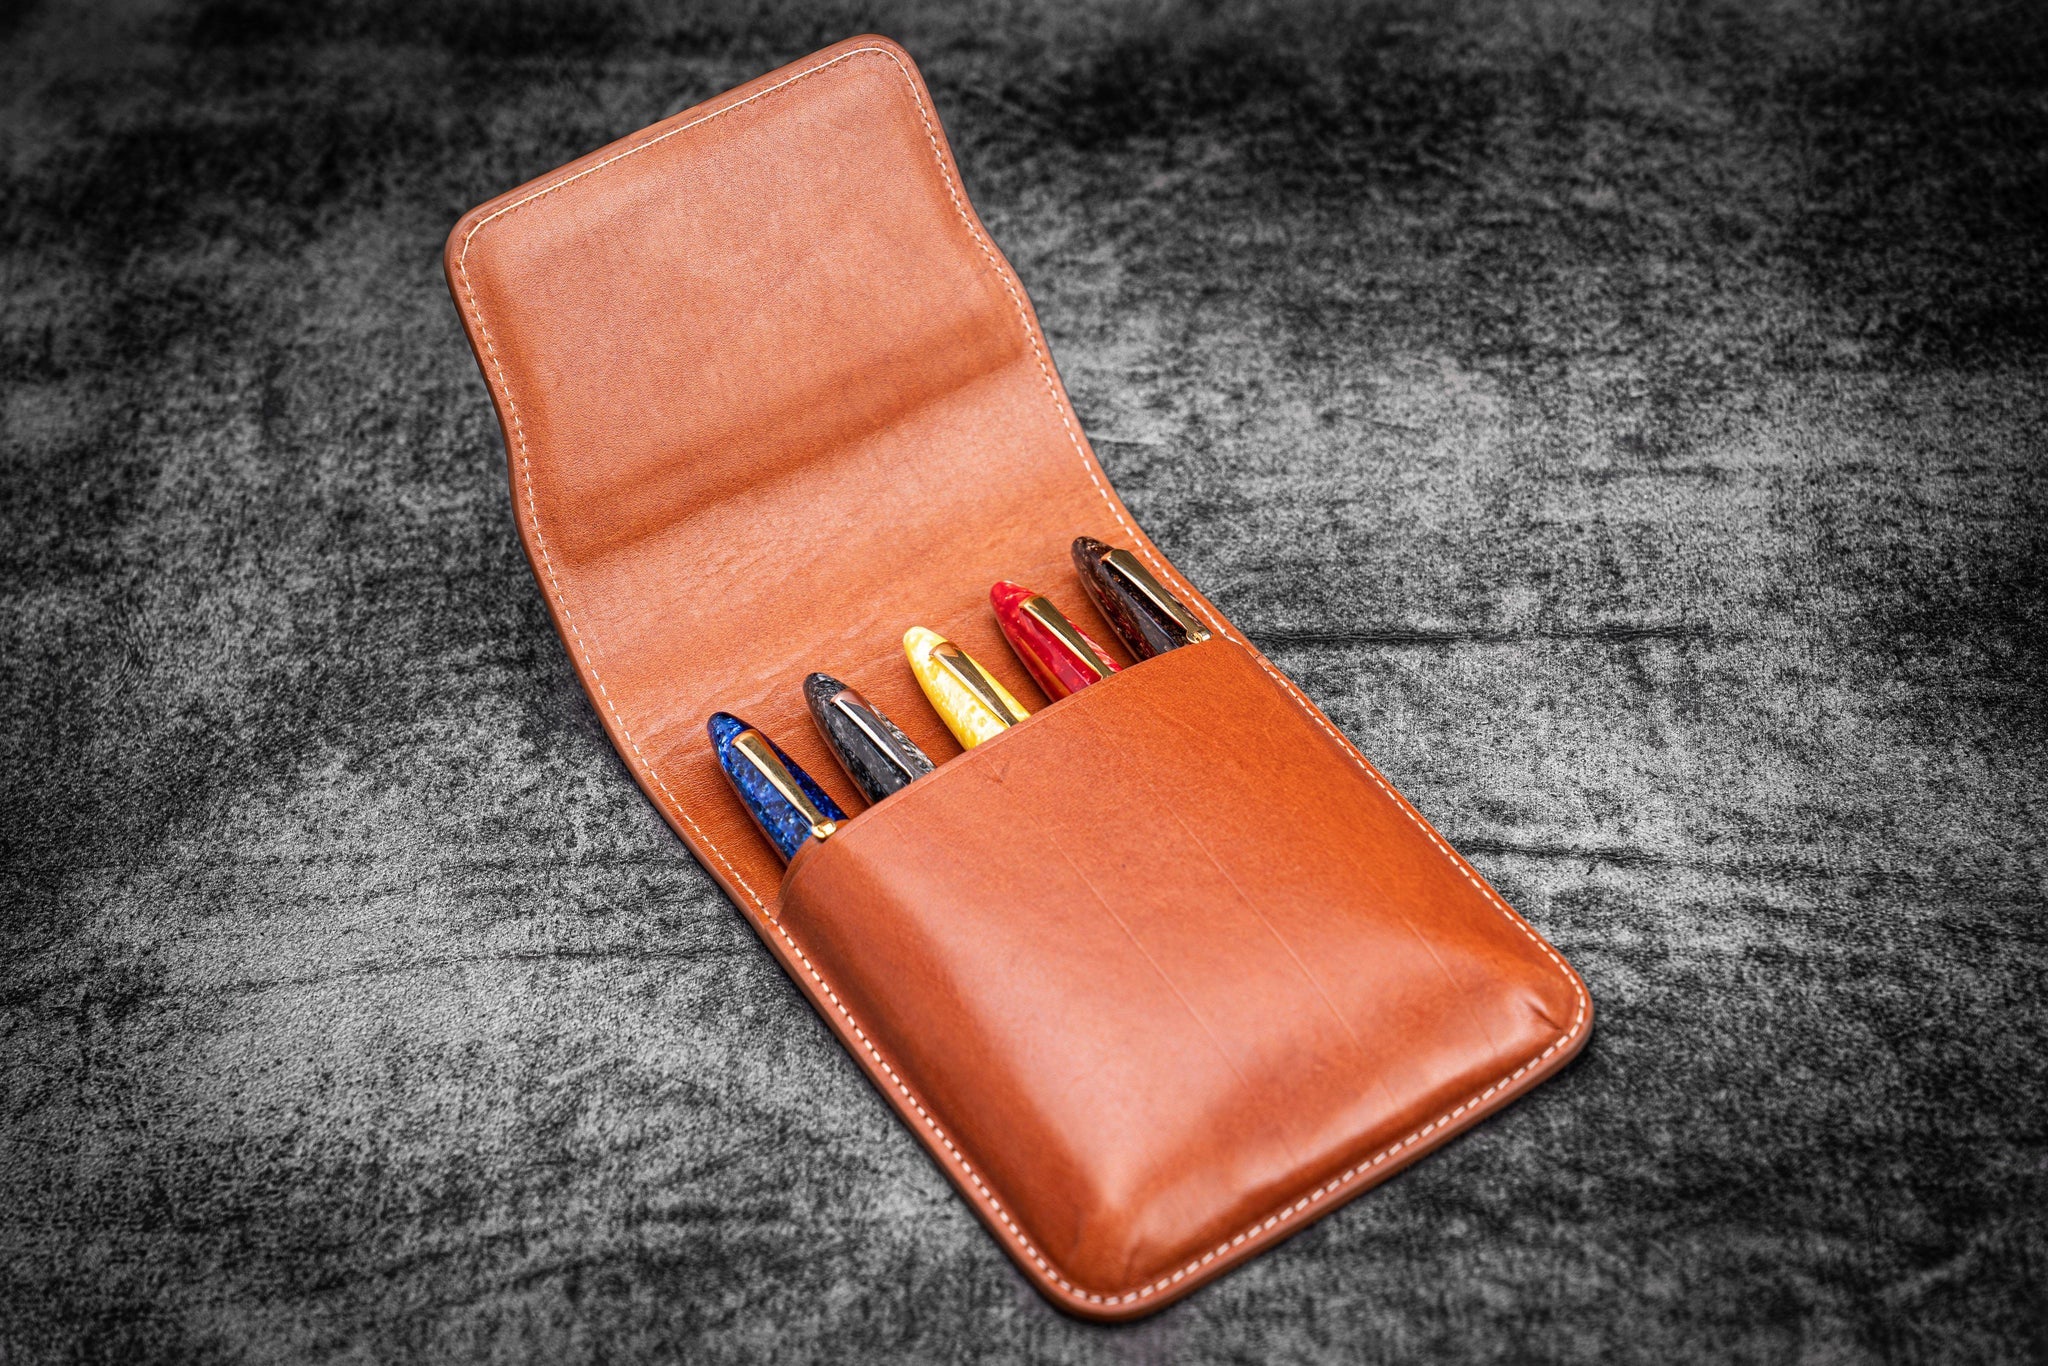 Galen Leather Zippered Magnum Opus 6 Slot Pen Case - Undyed Leather